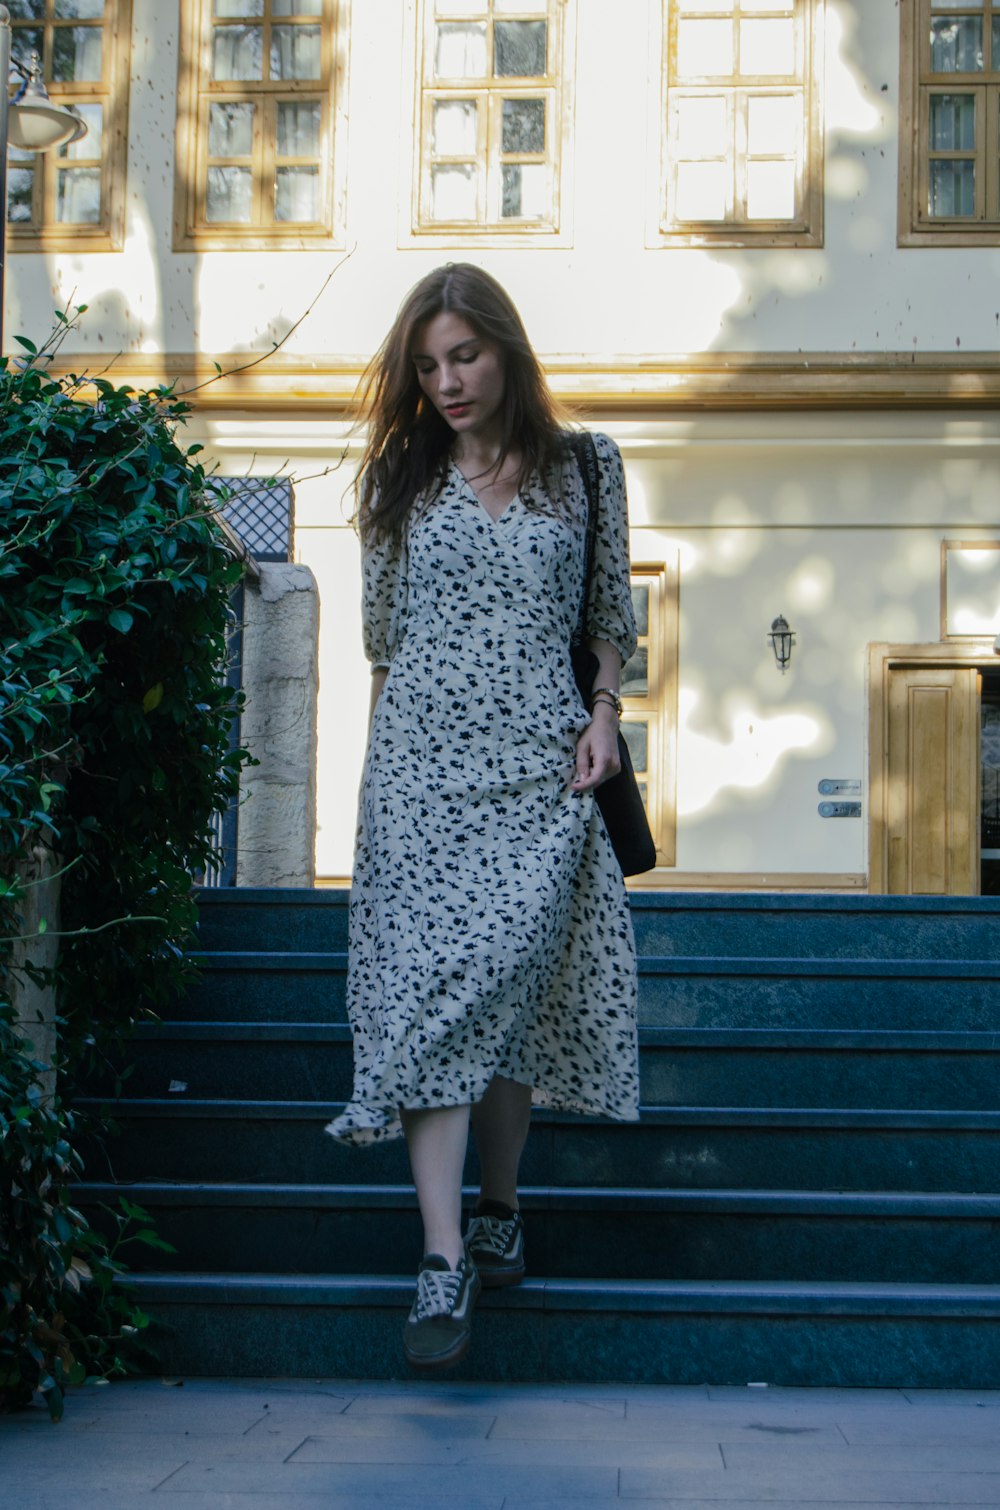 a woman in a dress walking up some steps